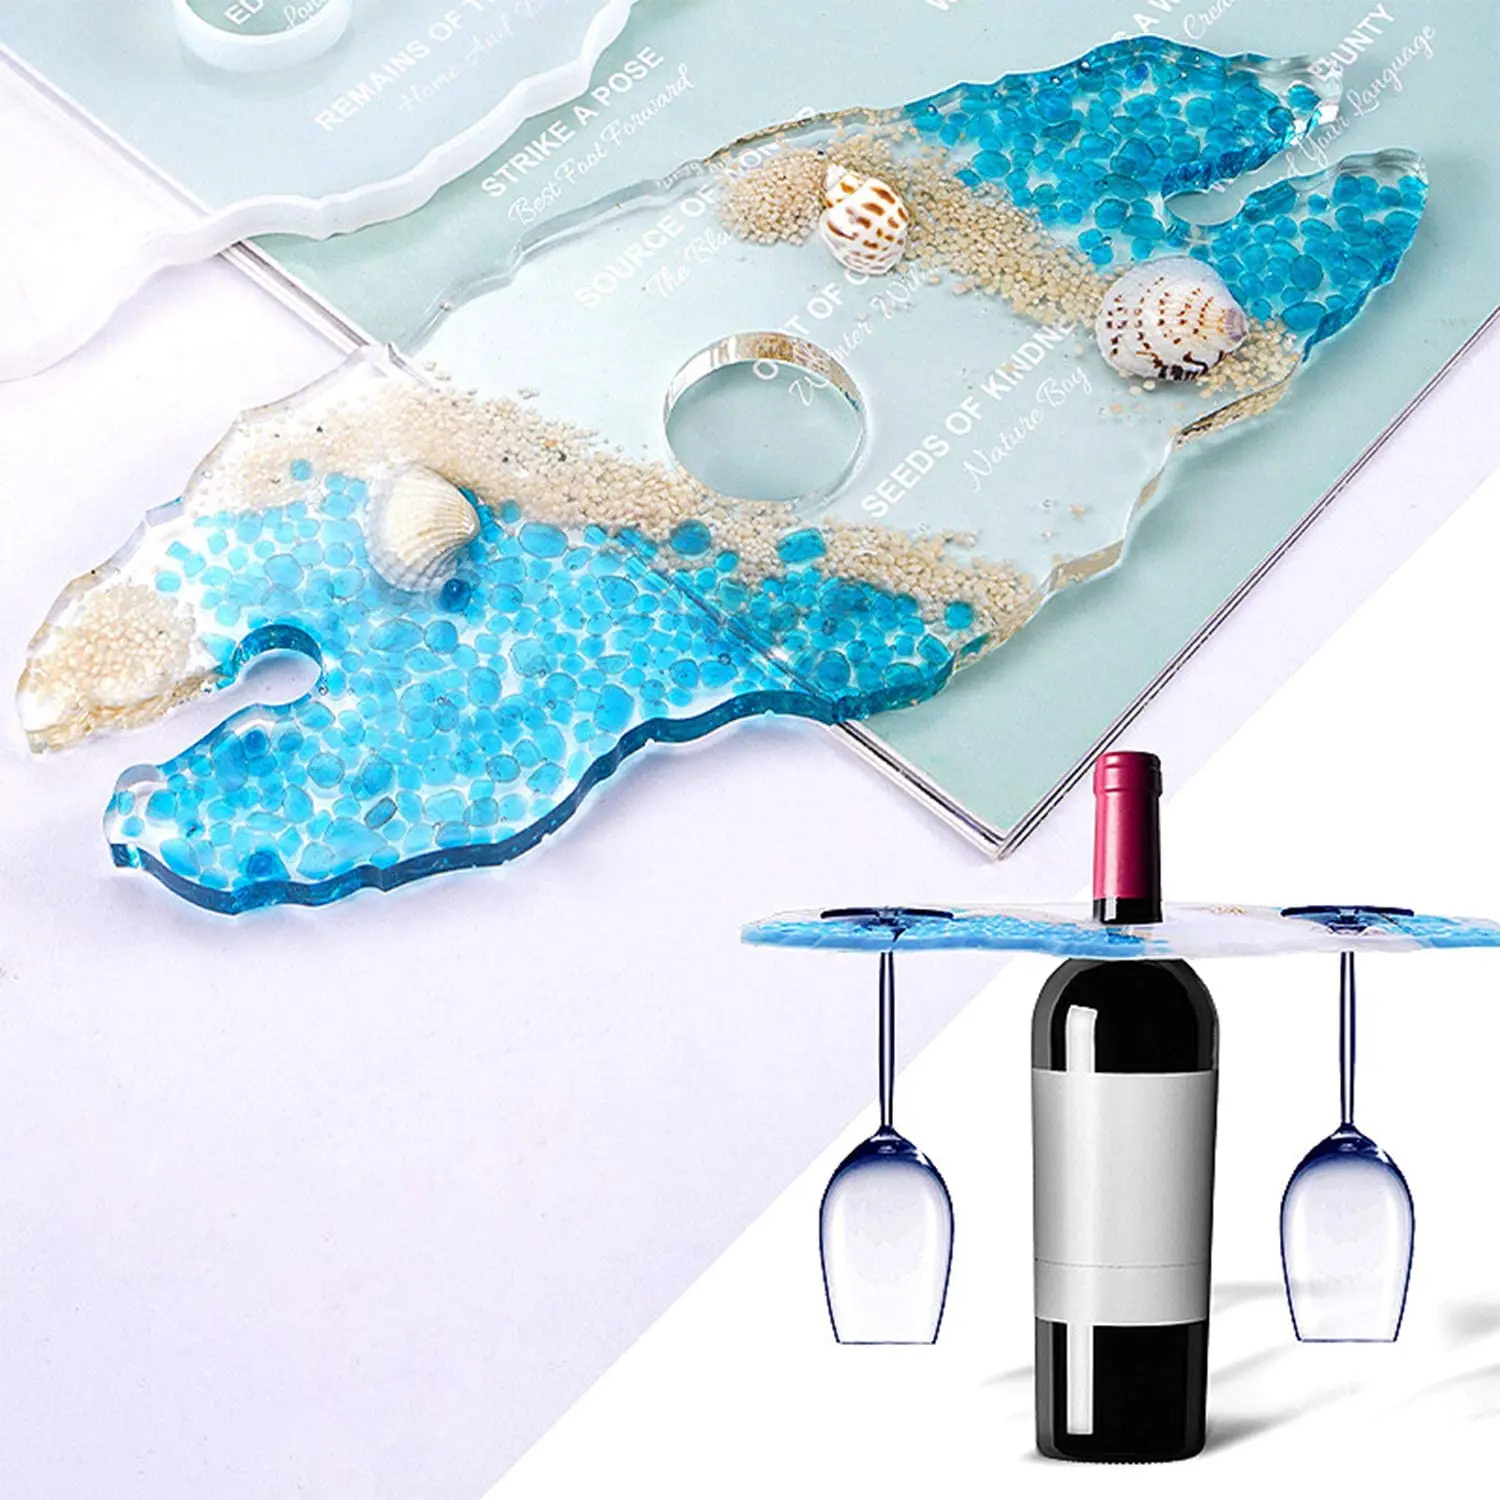 Wine Holder Resin Mold Silicone Tray Coaster Molds Epoxy Resin Casting Wine Rack Mold Diy Glass Cup Holder Mold Home Decoration